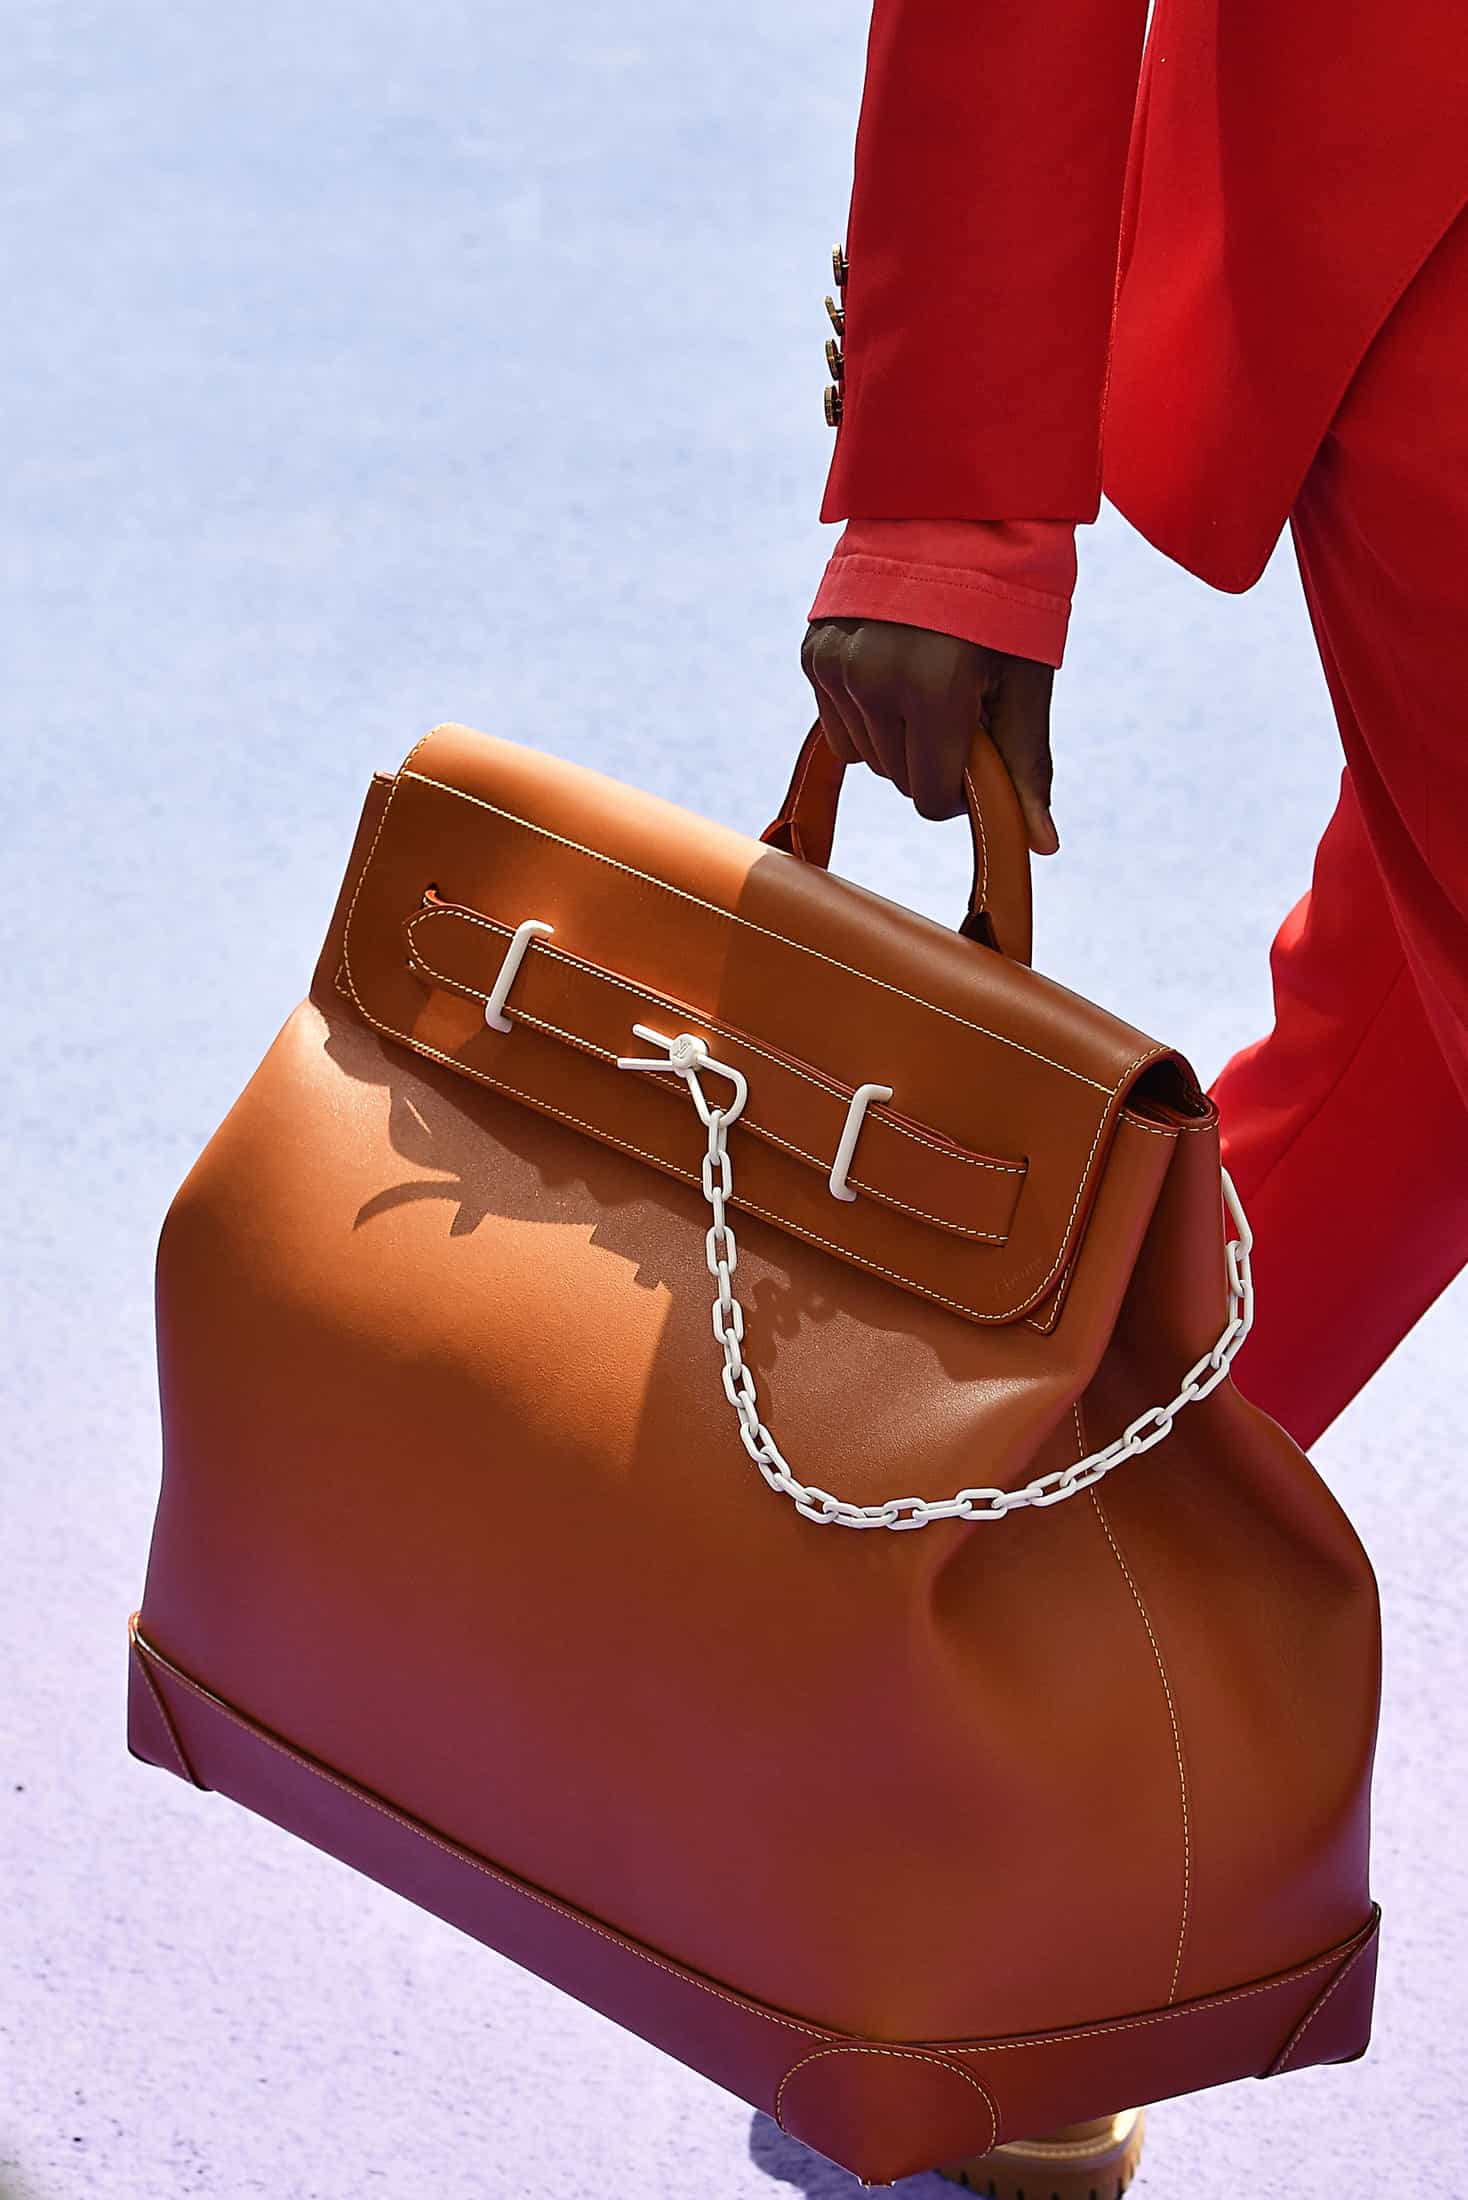 All of the stand-out Louis Vuitton bags by Virgil Abloh